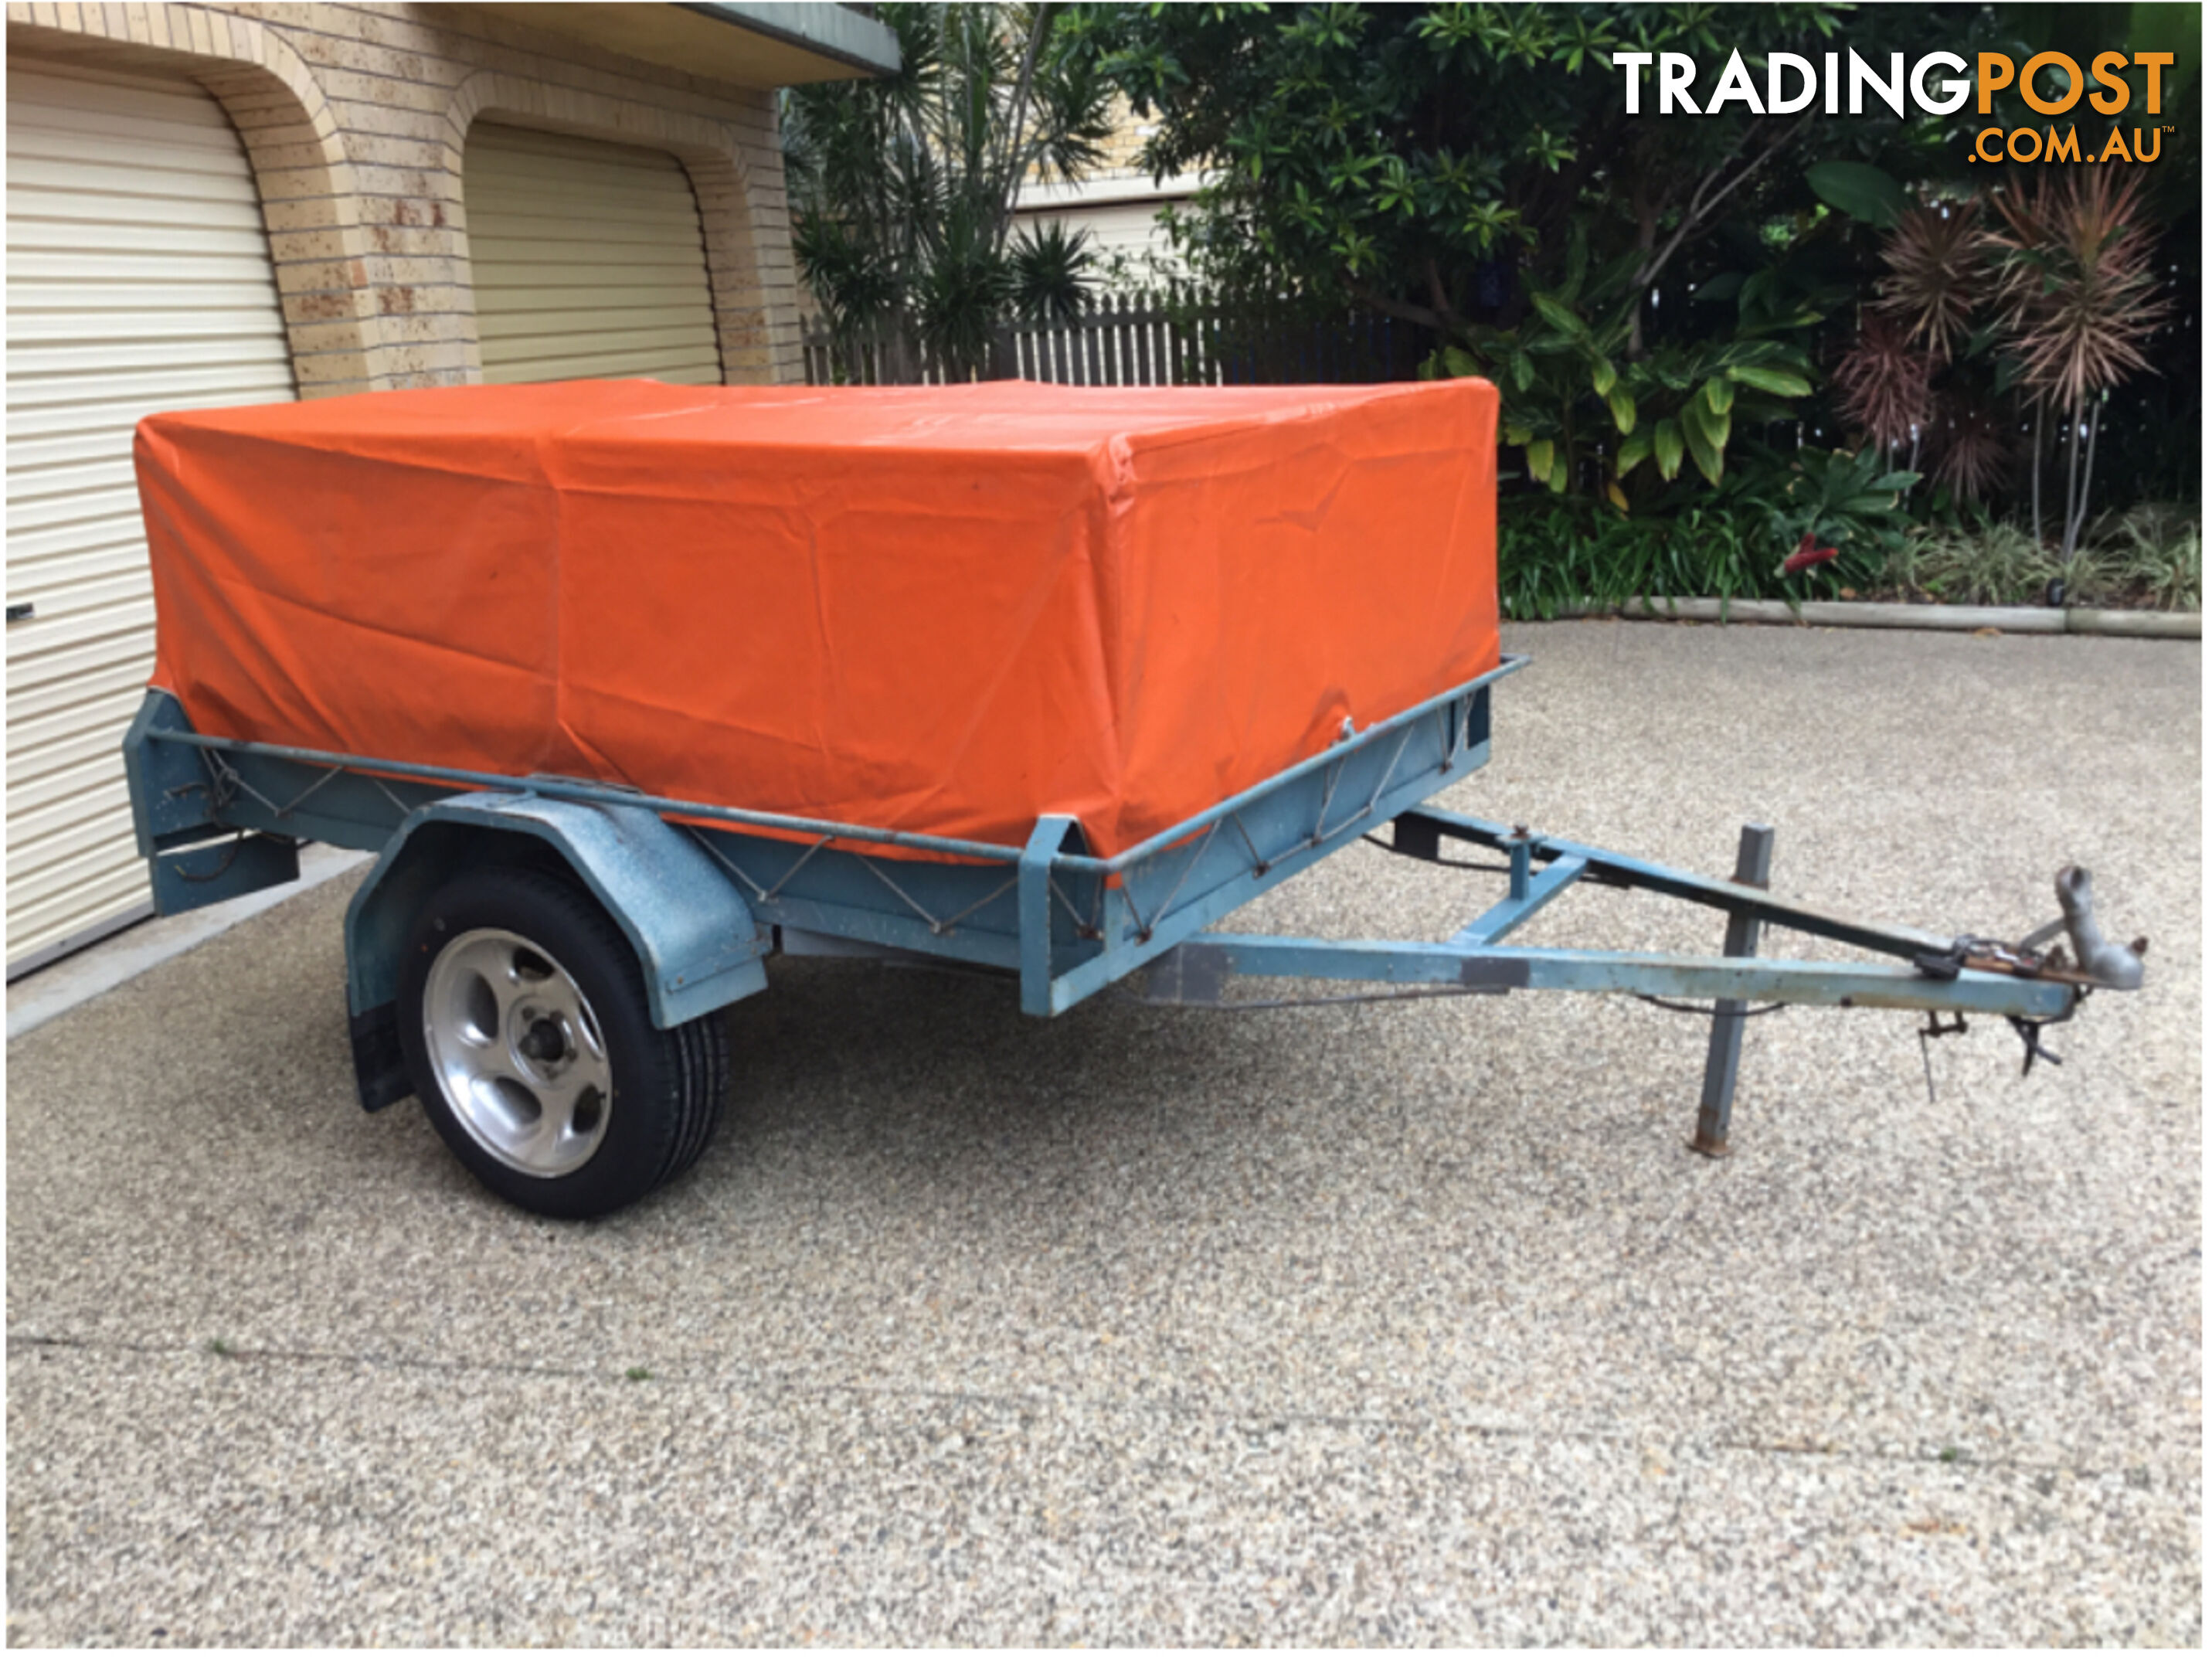 Trailer with removable frame and canopy